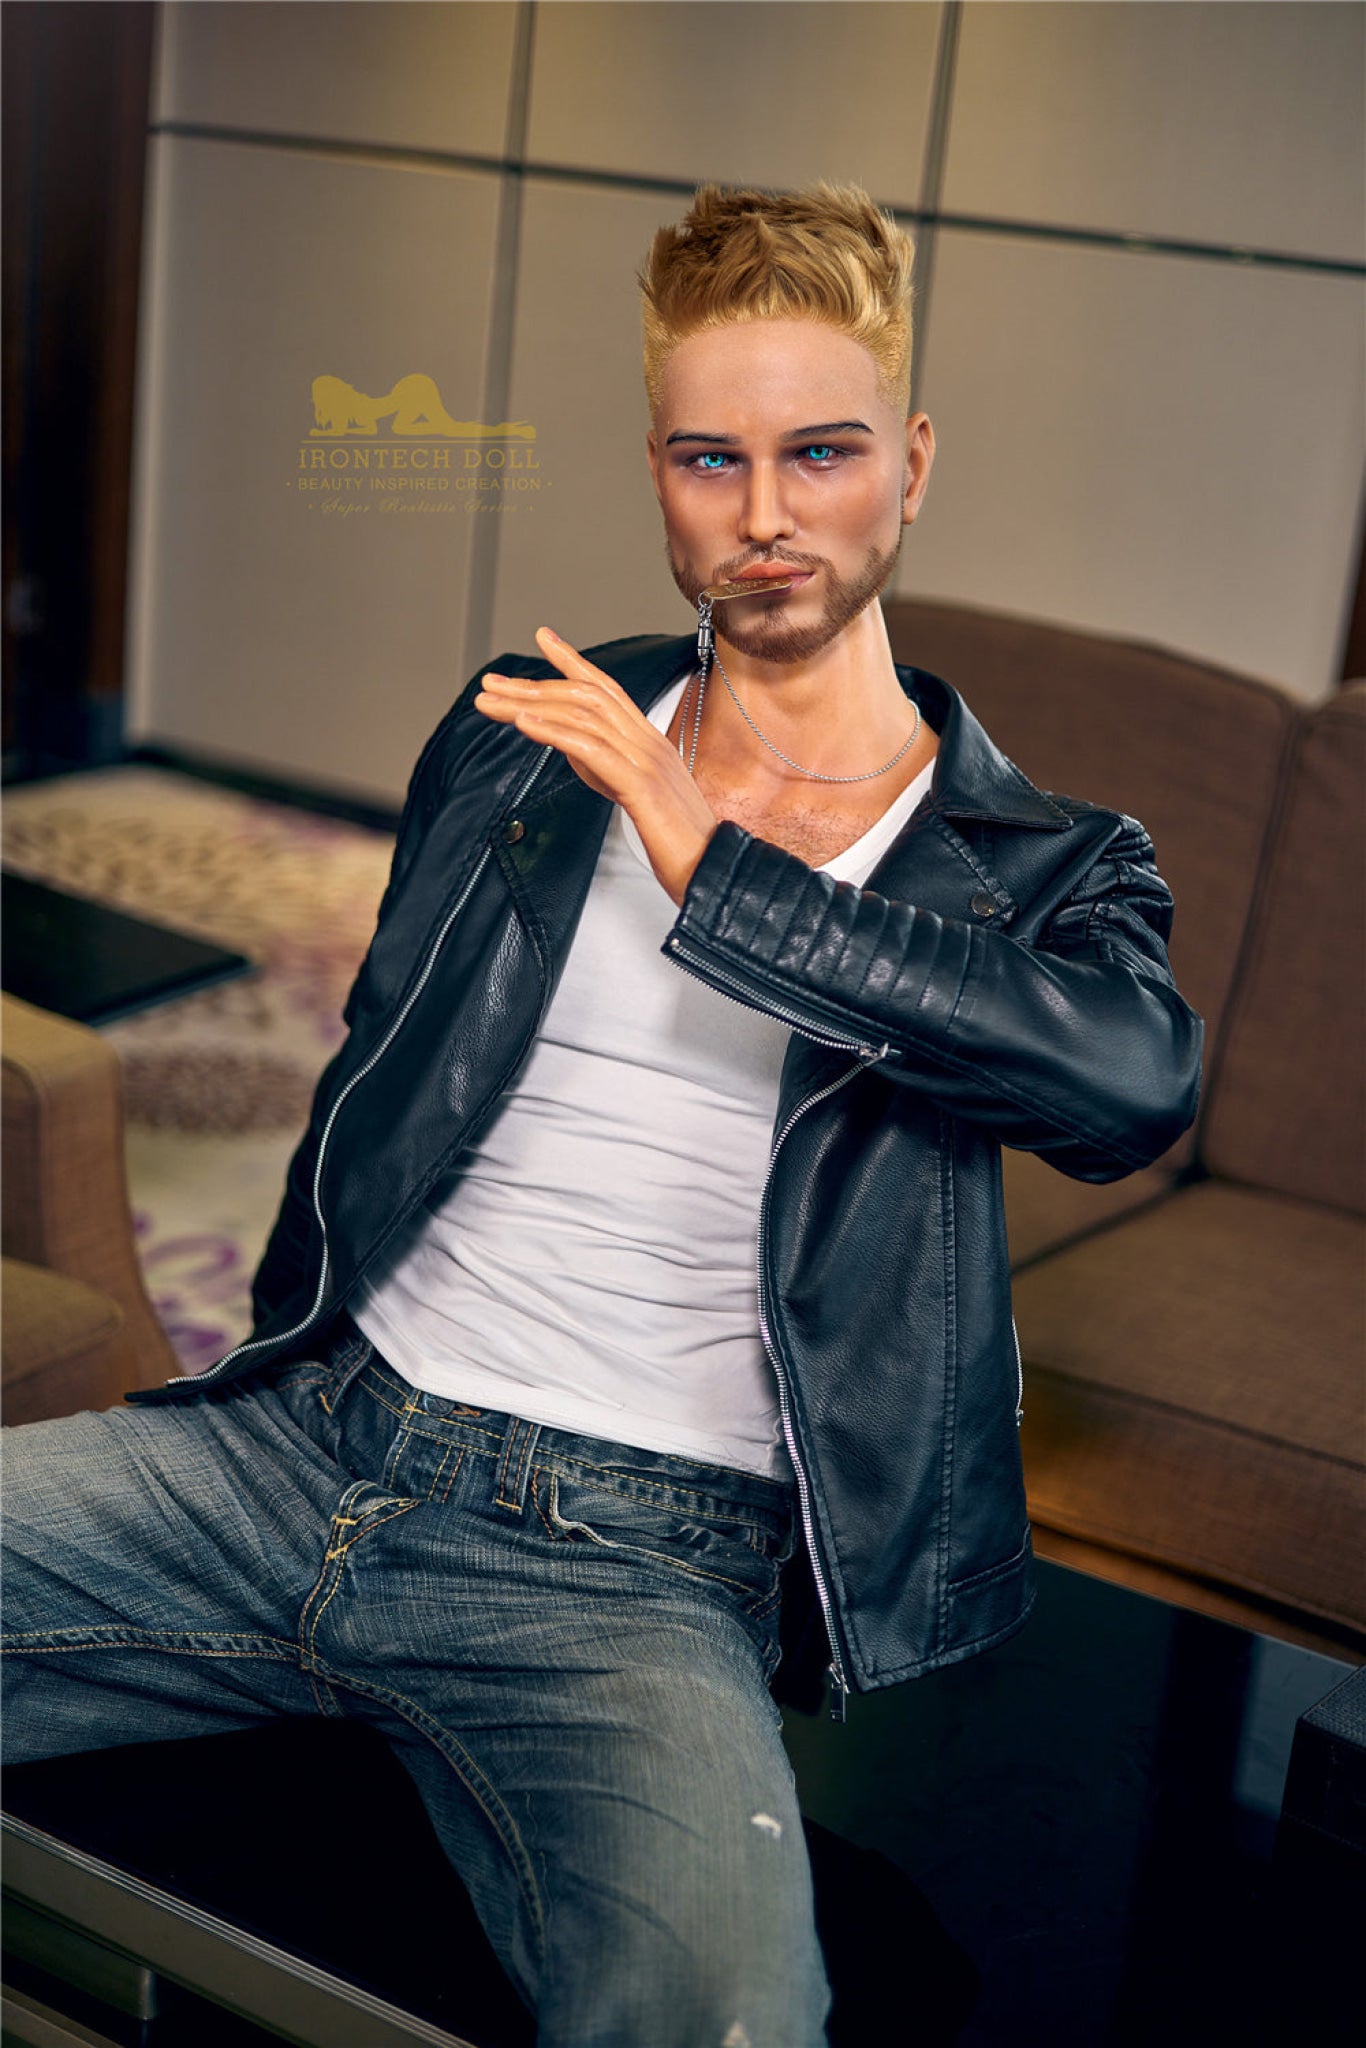 Kevin Silicone Male Sex Doll - IronTech Doll® Irontech Doll®